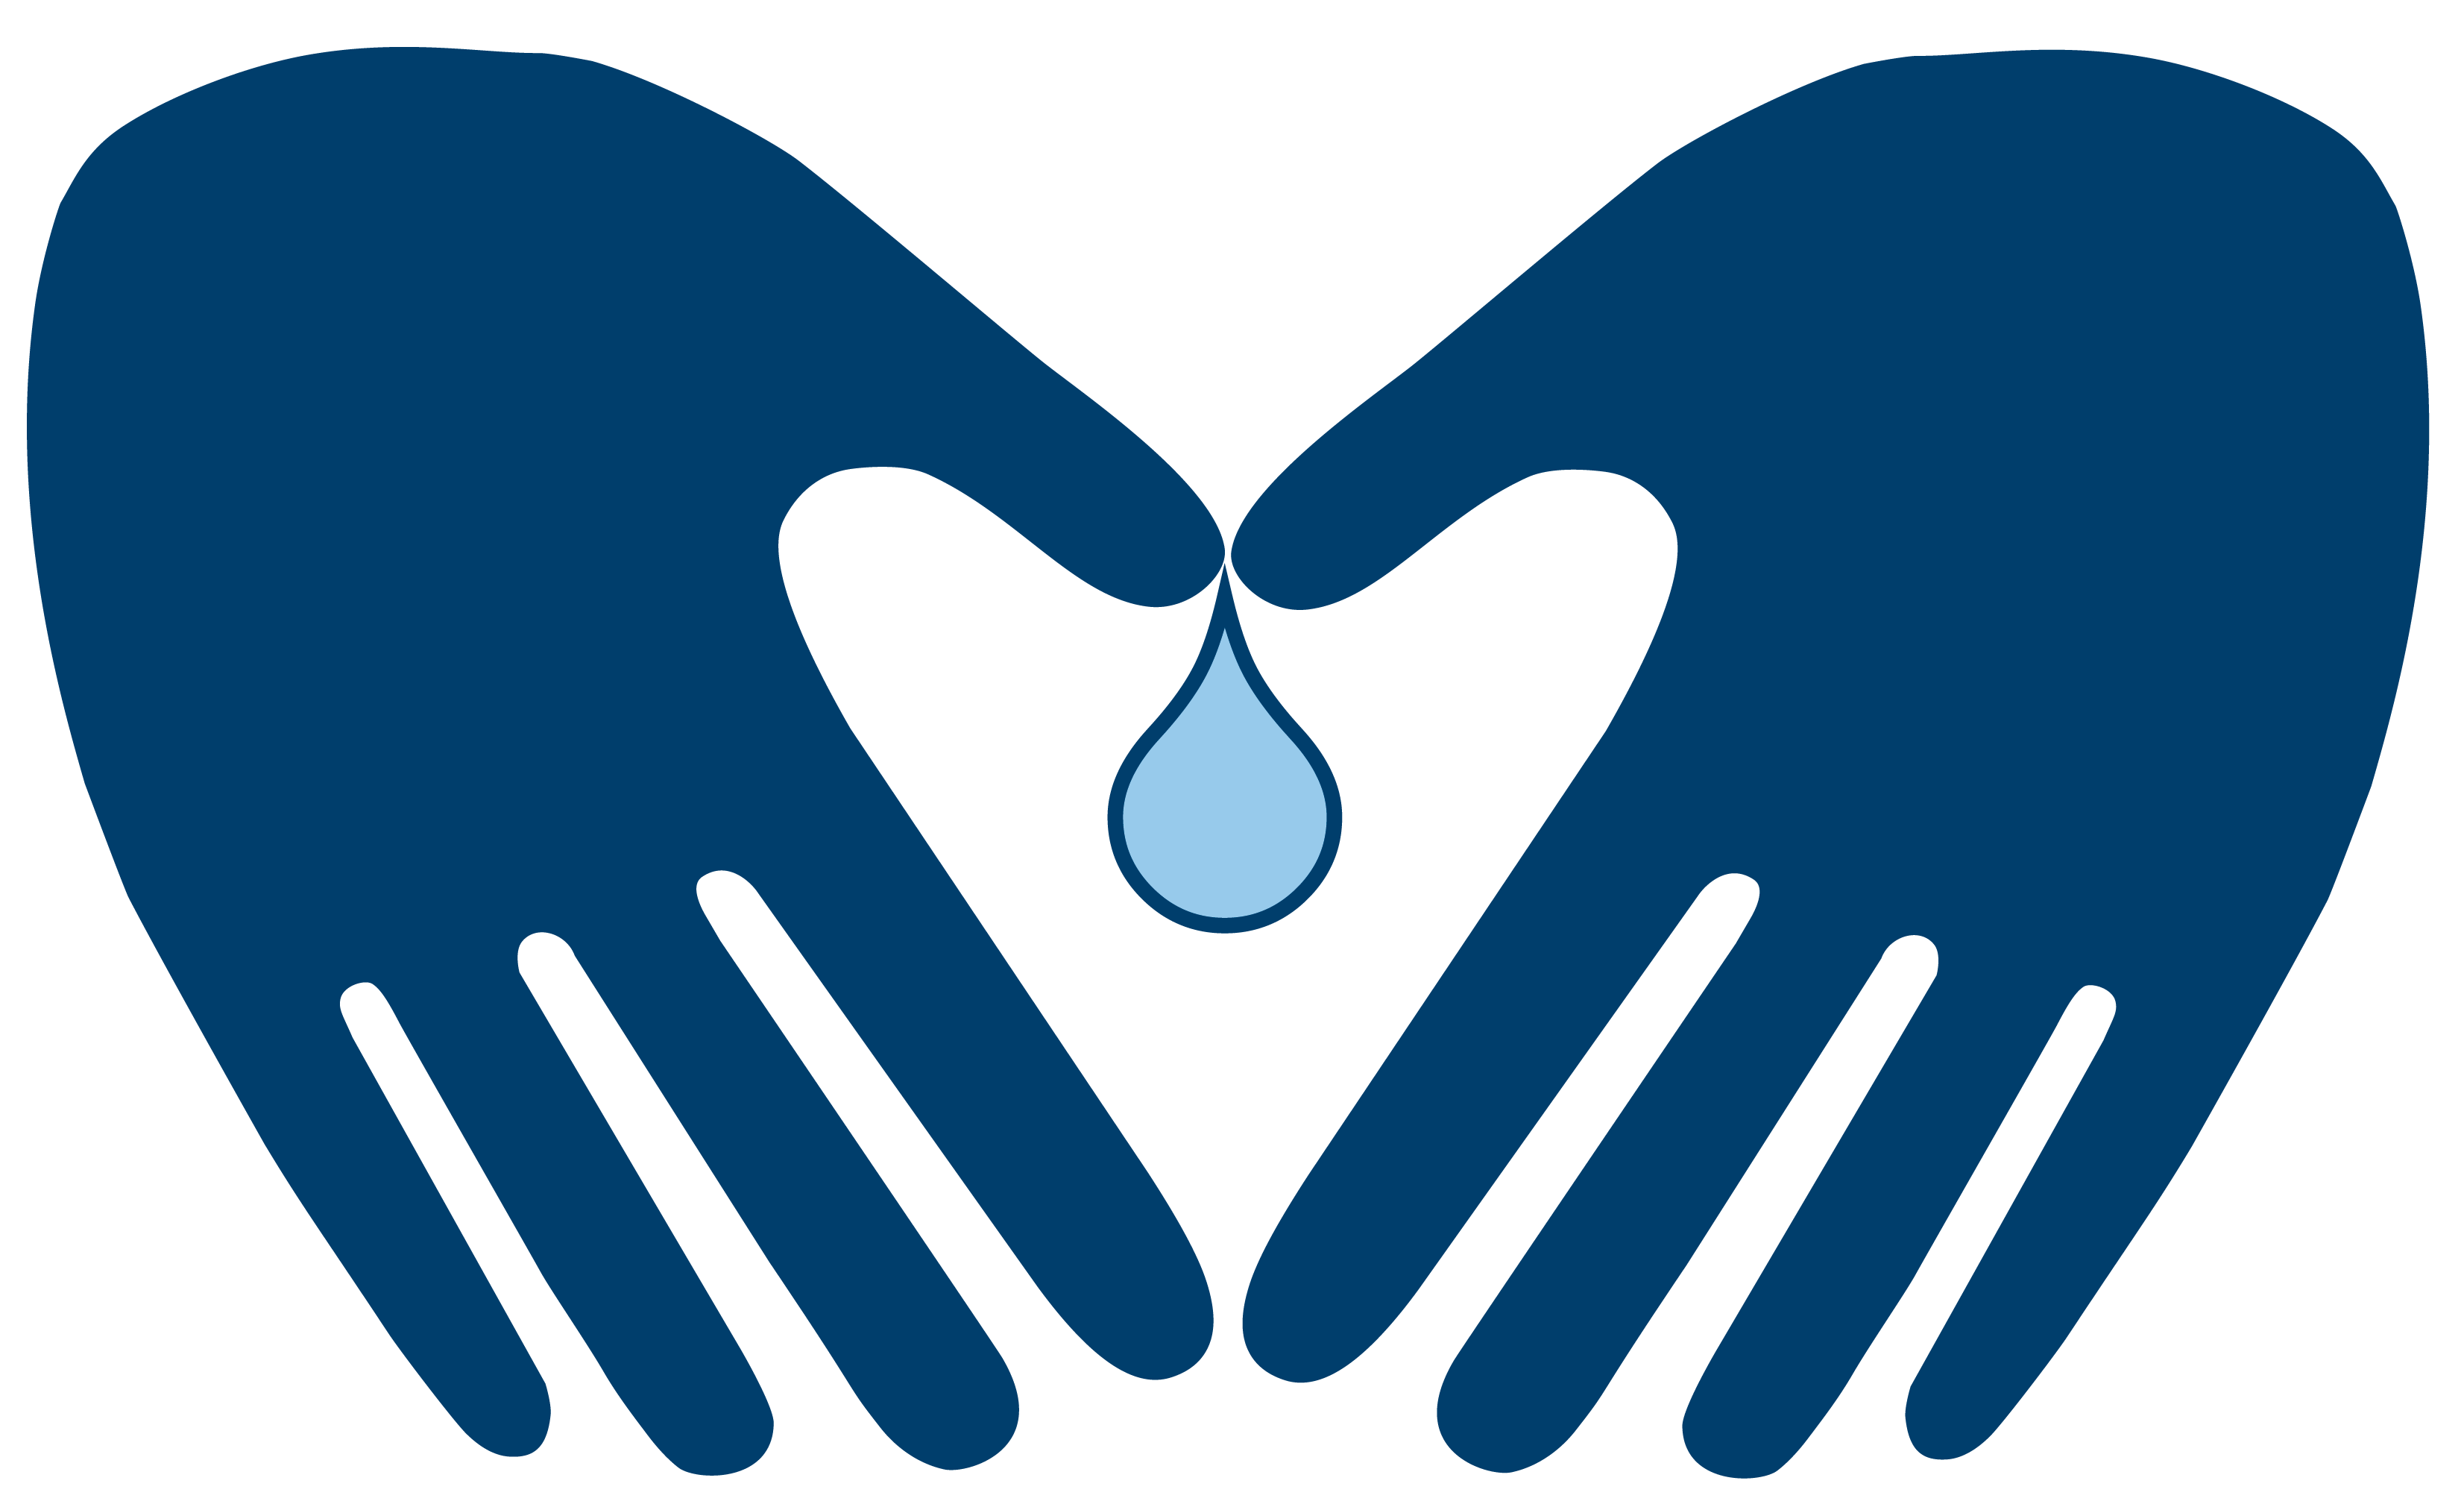 Hands holding water droplet